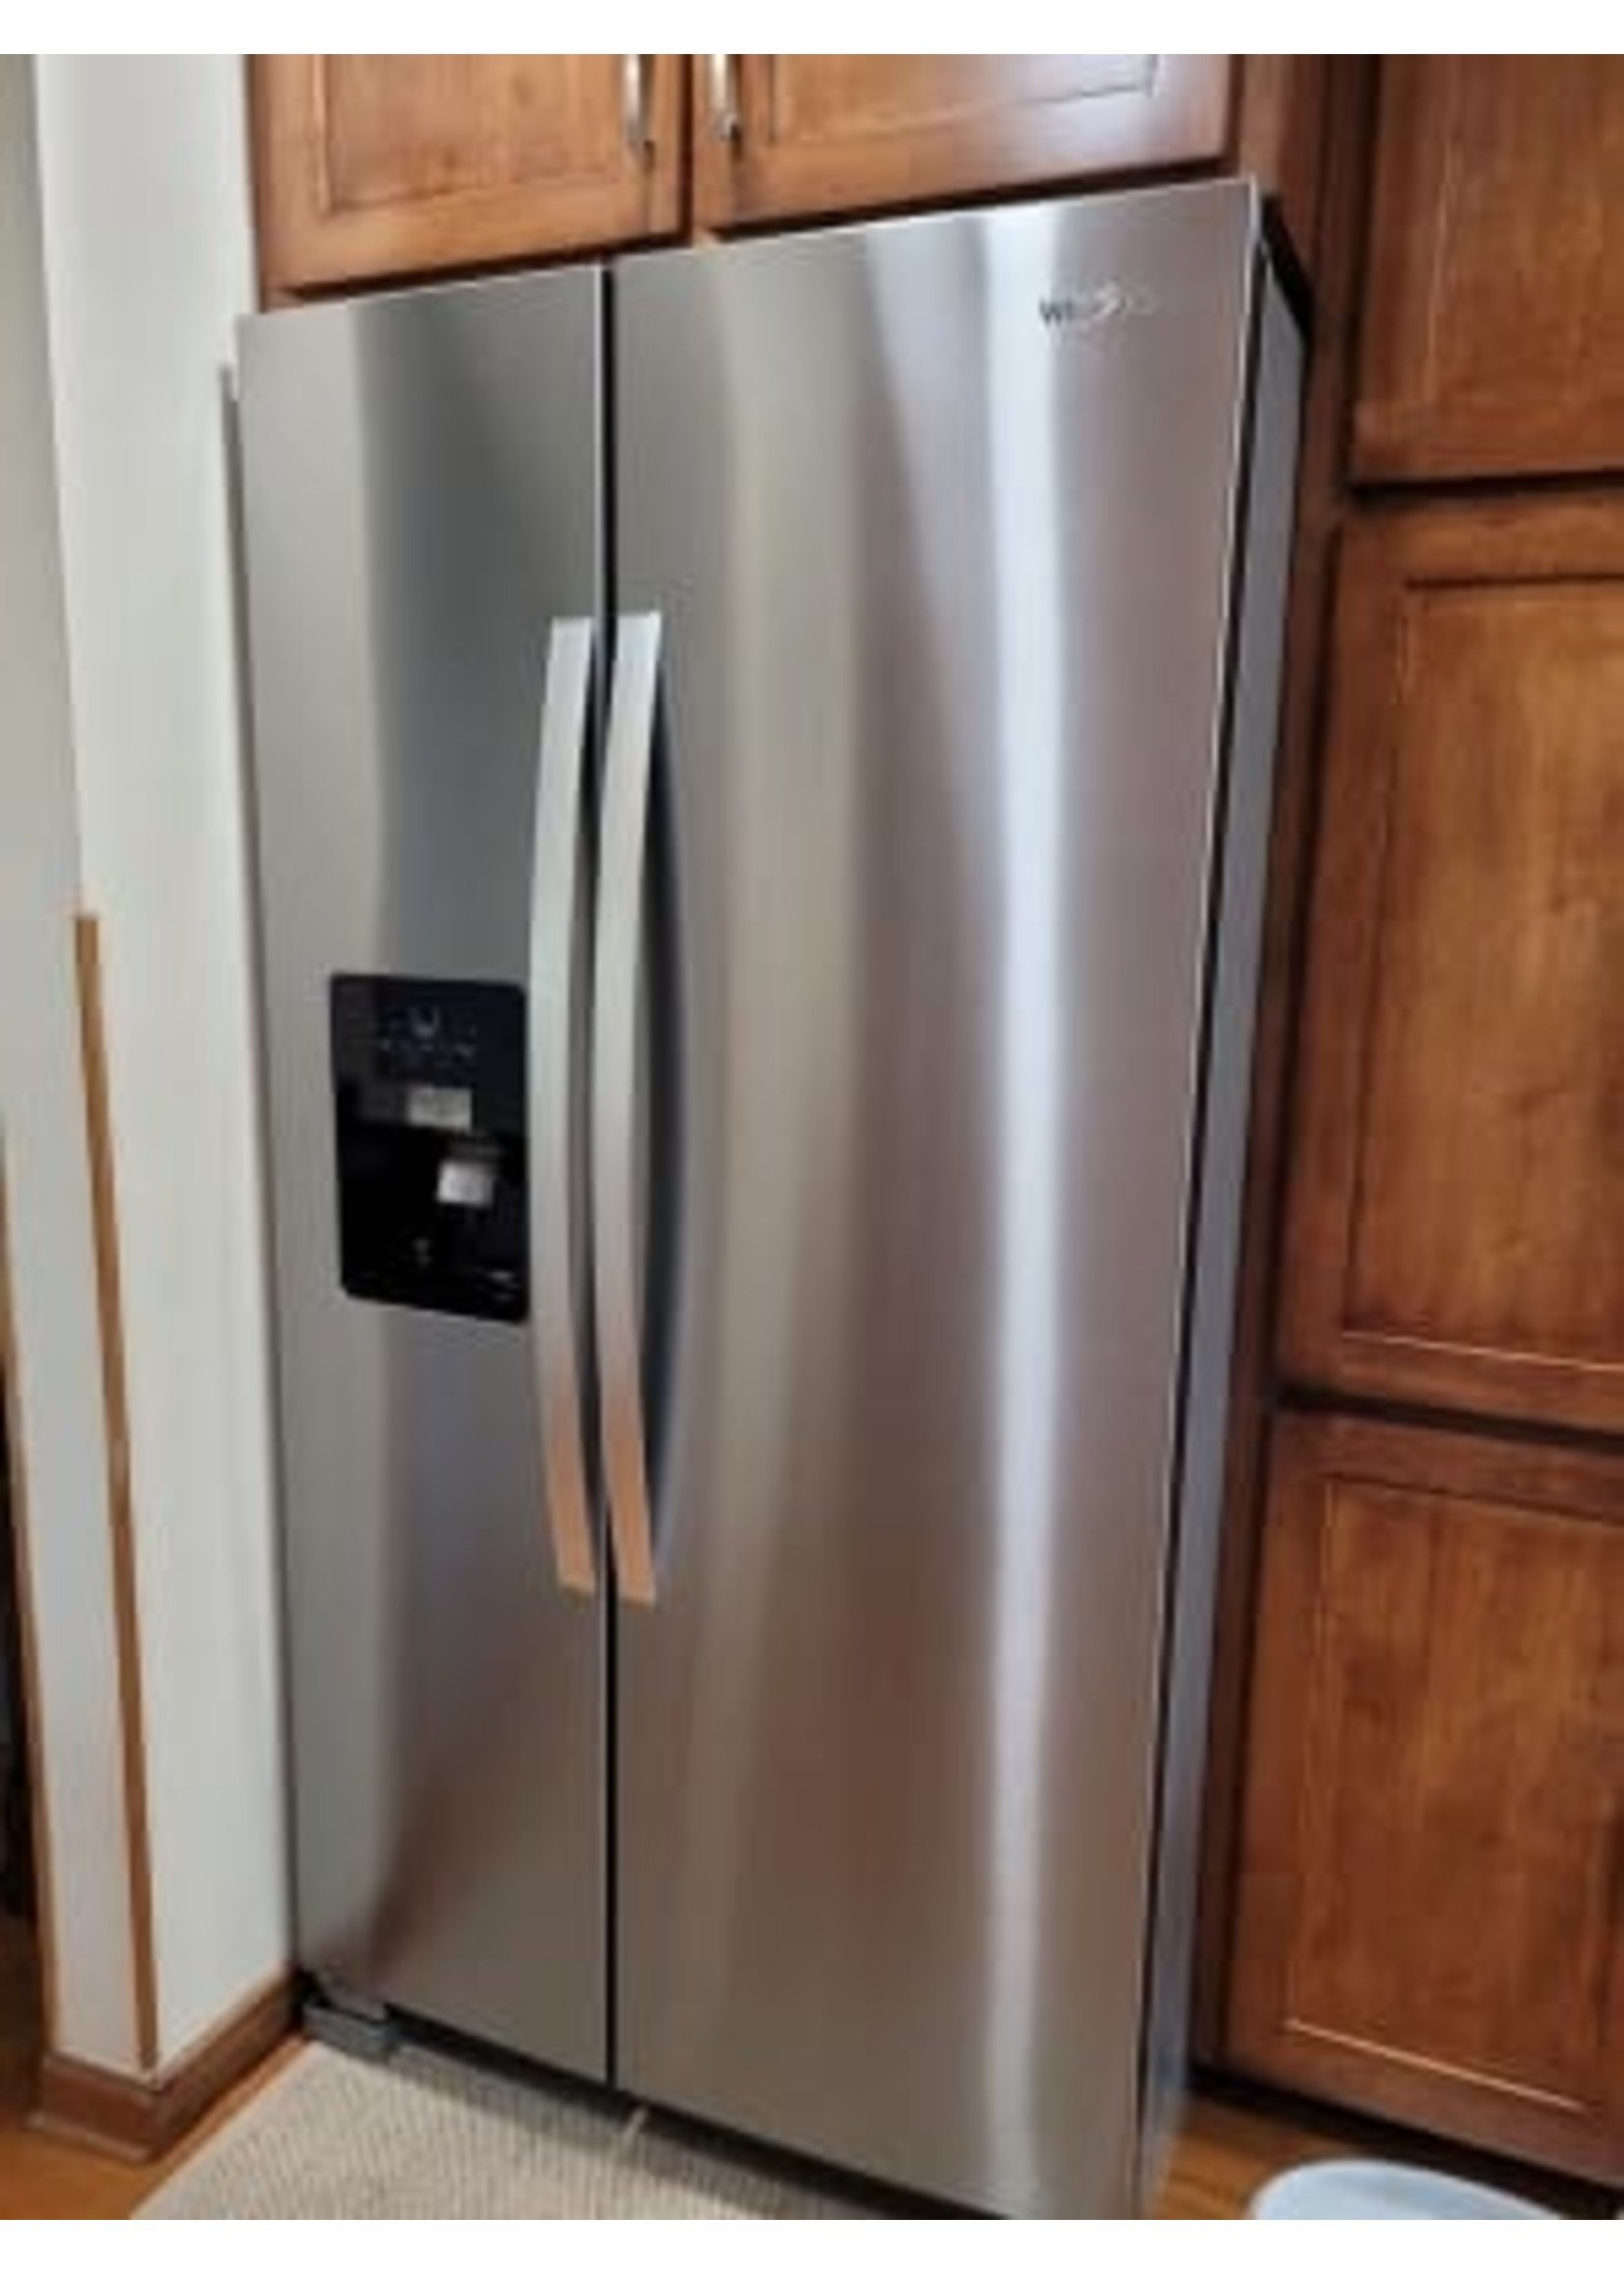 Whirlpool Whirlpool 24.6-cu ft Side-By-Side Refrigerator with Ice and Water Dispenser - Fingerprint Resistant Stainless Steel